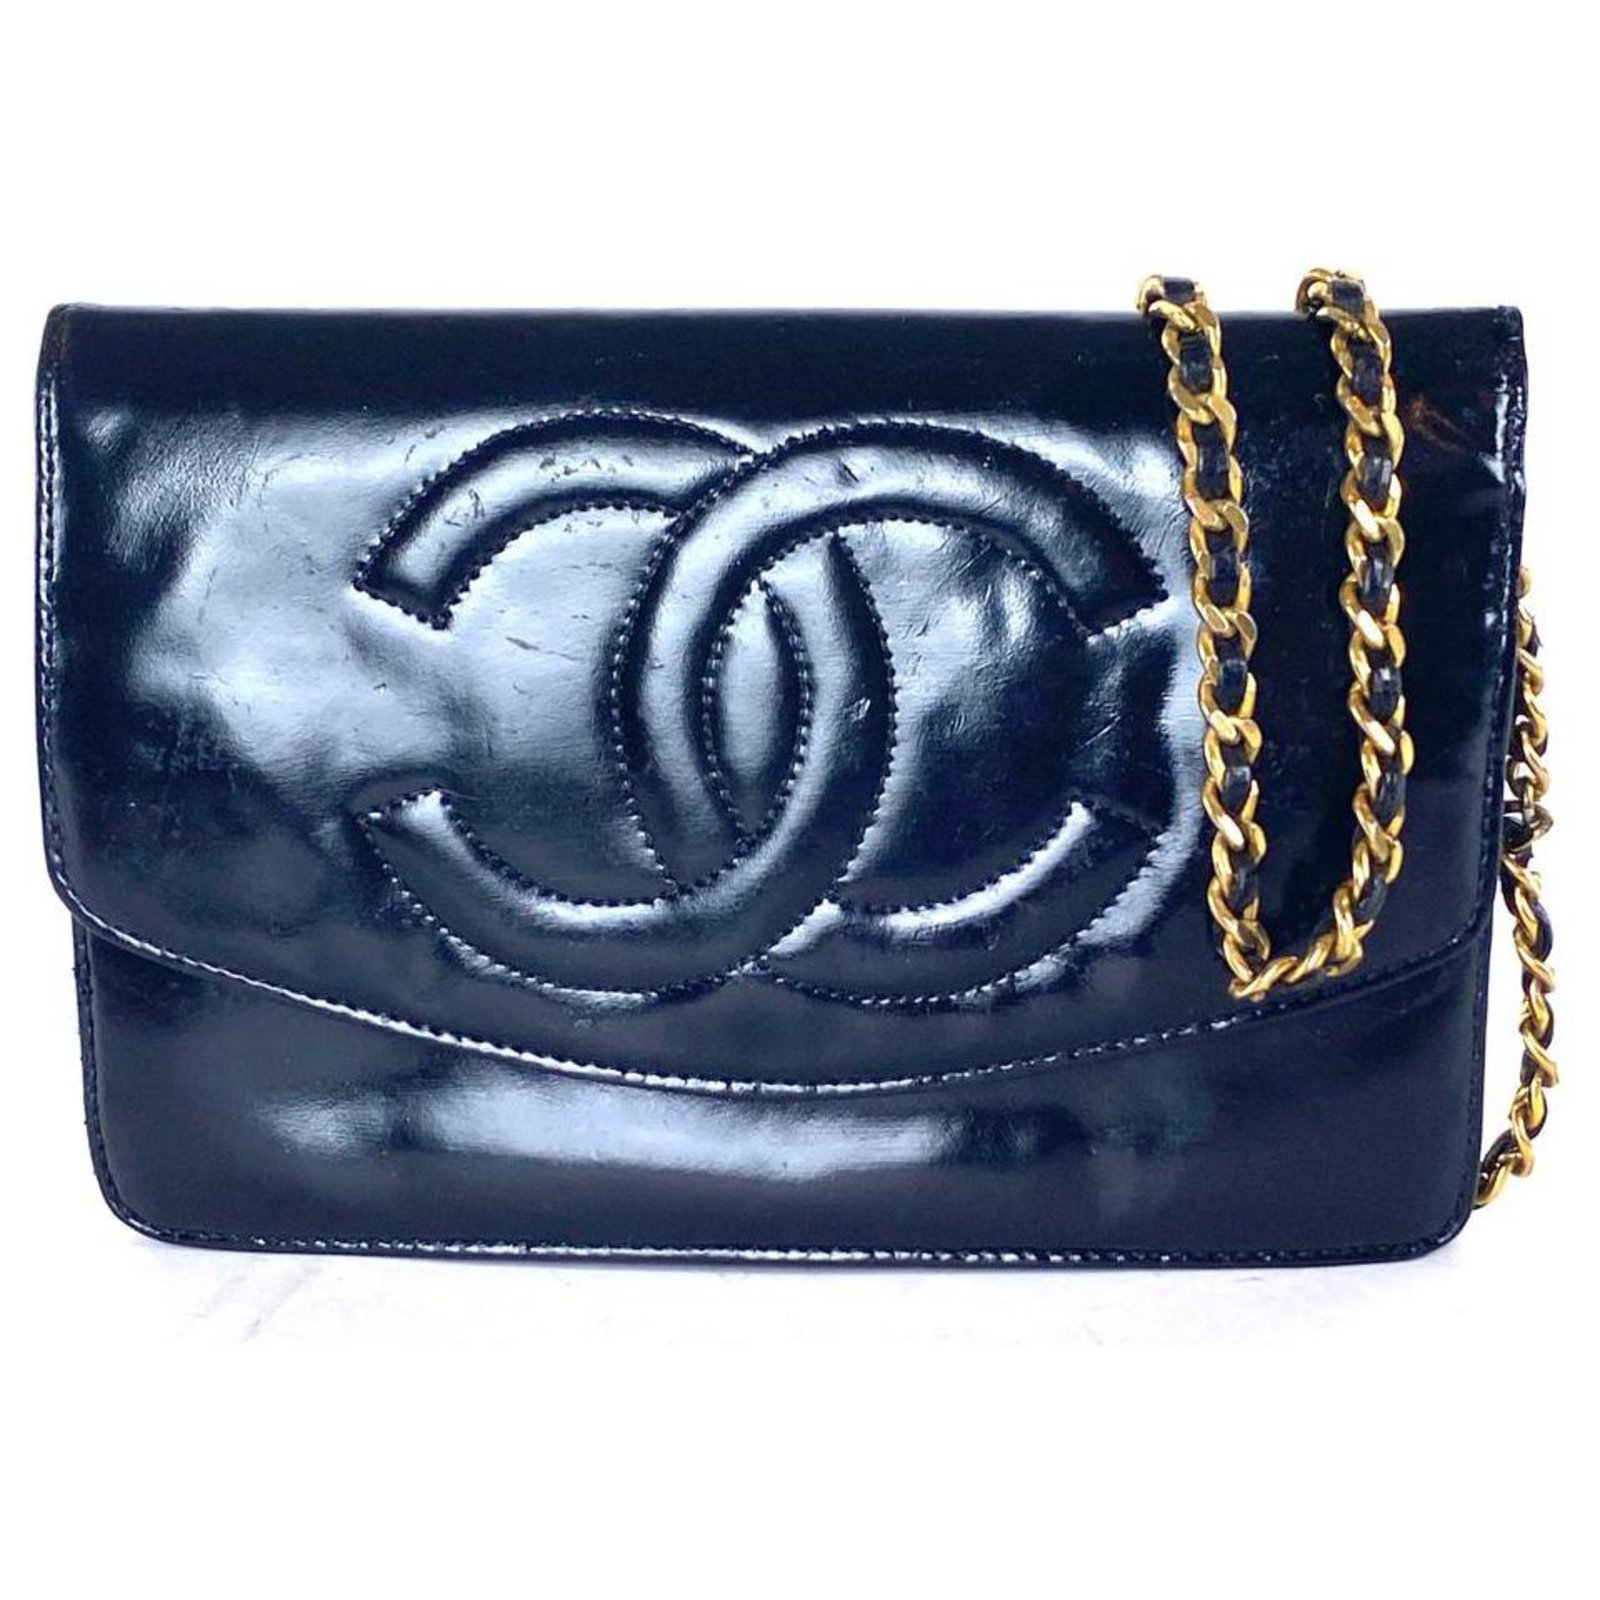 Chanel Black Patent Wallet On Chain Flap Bag Leather White gold